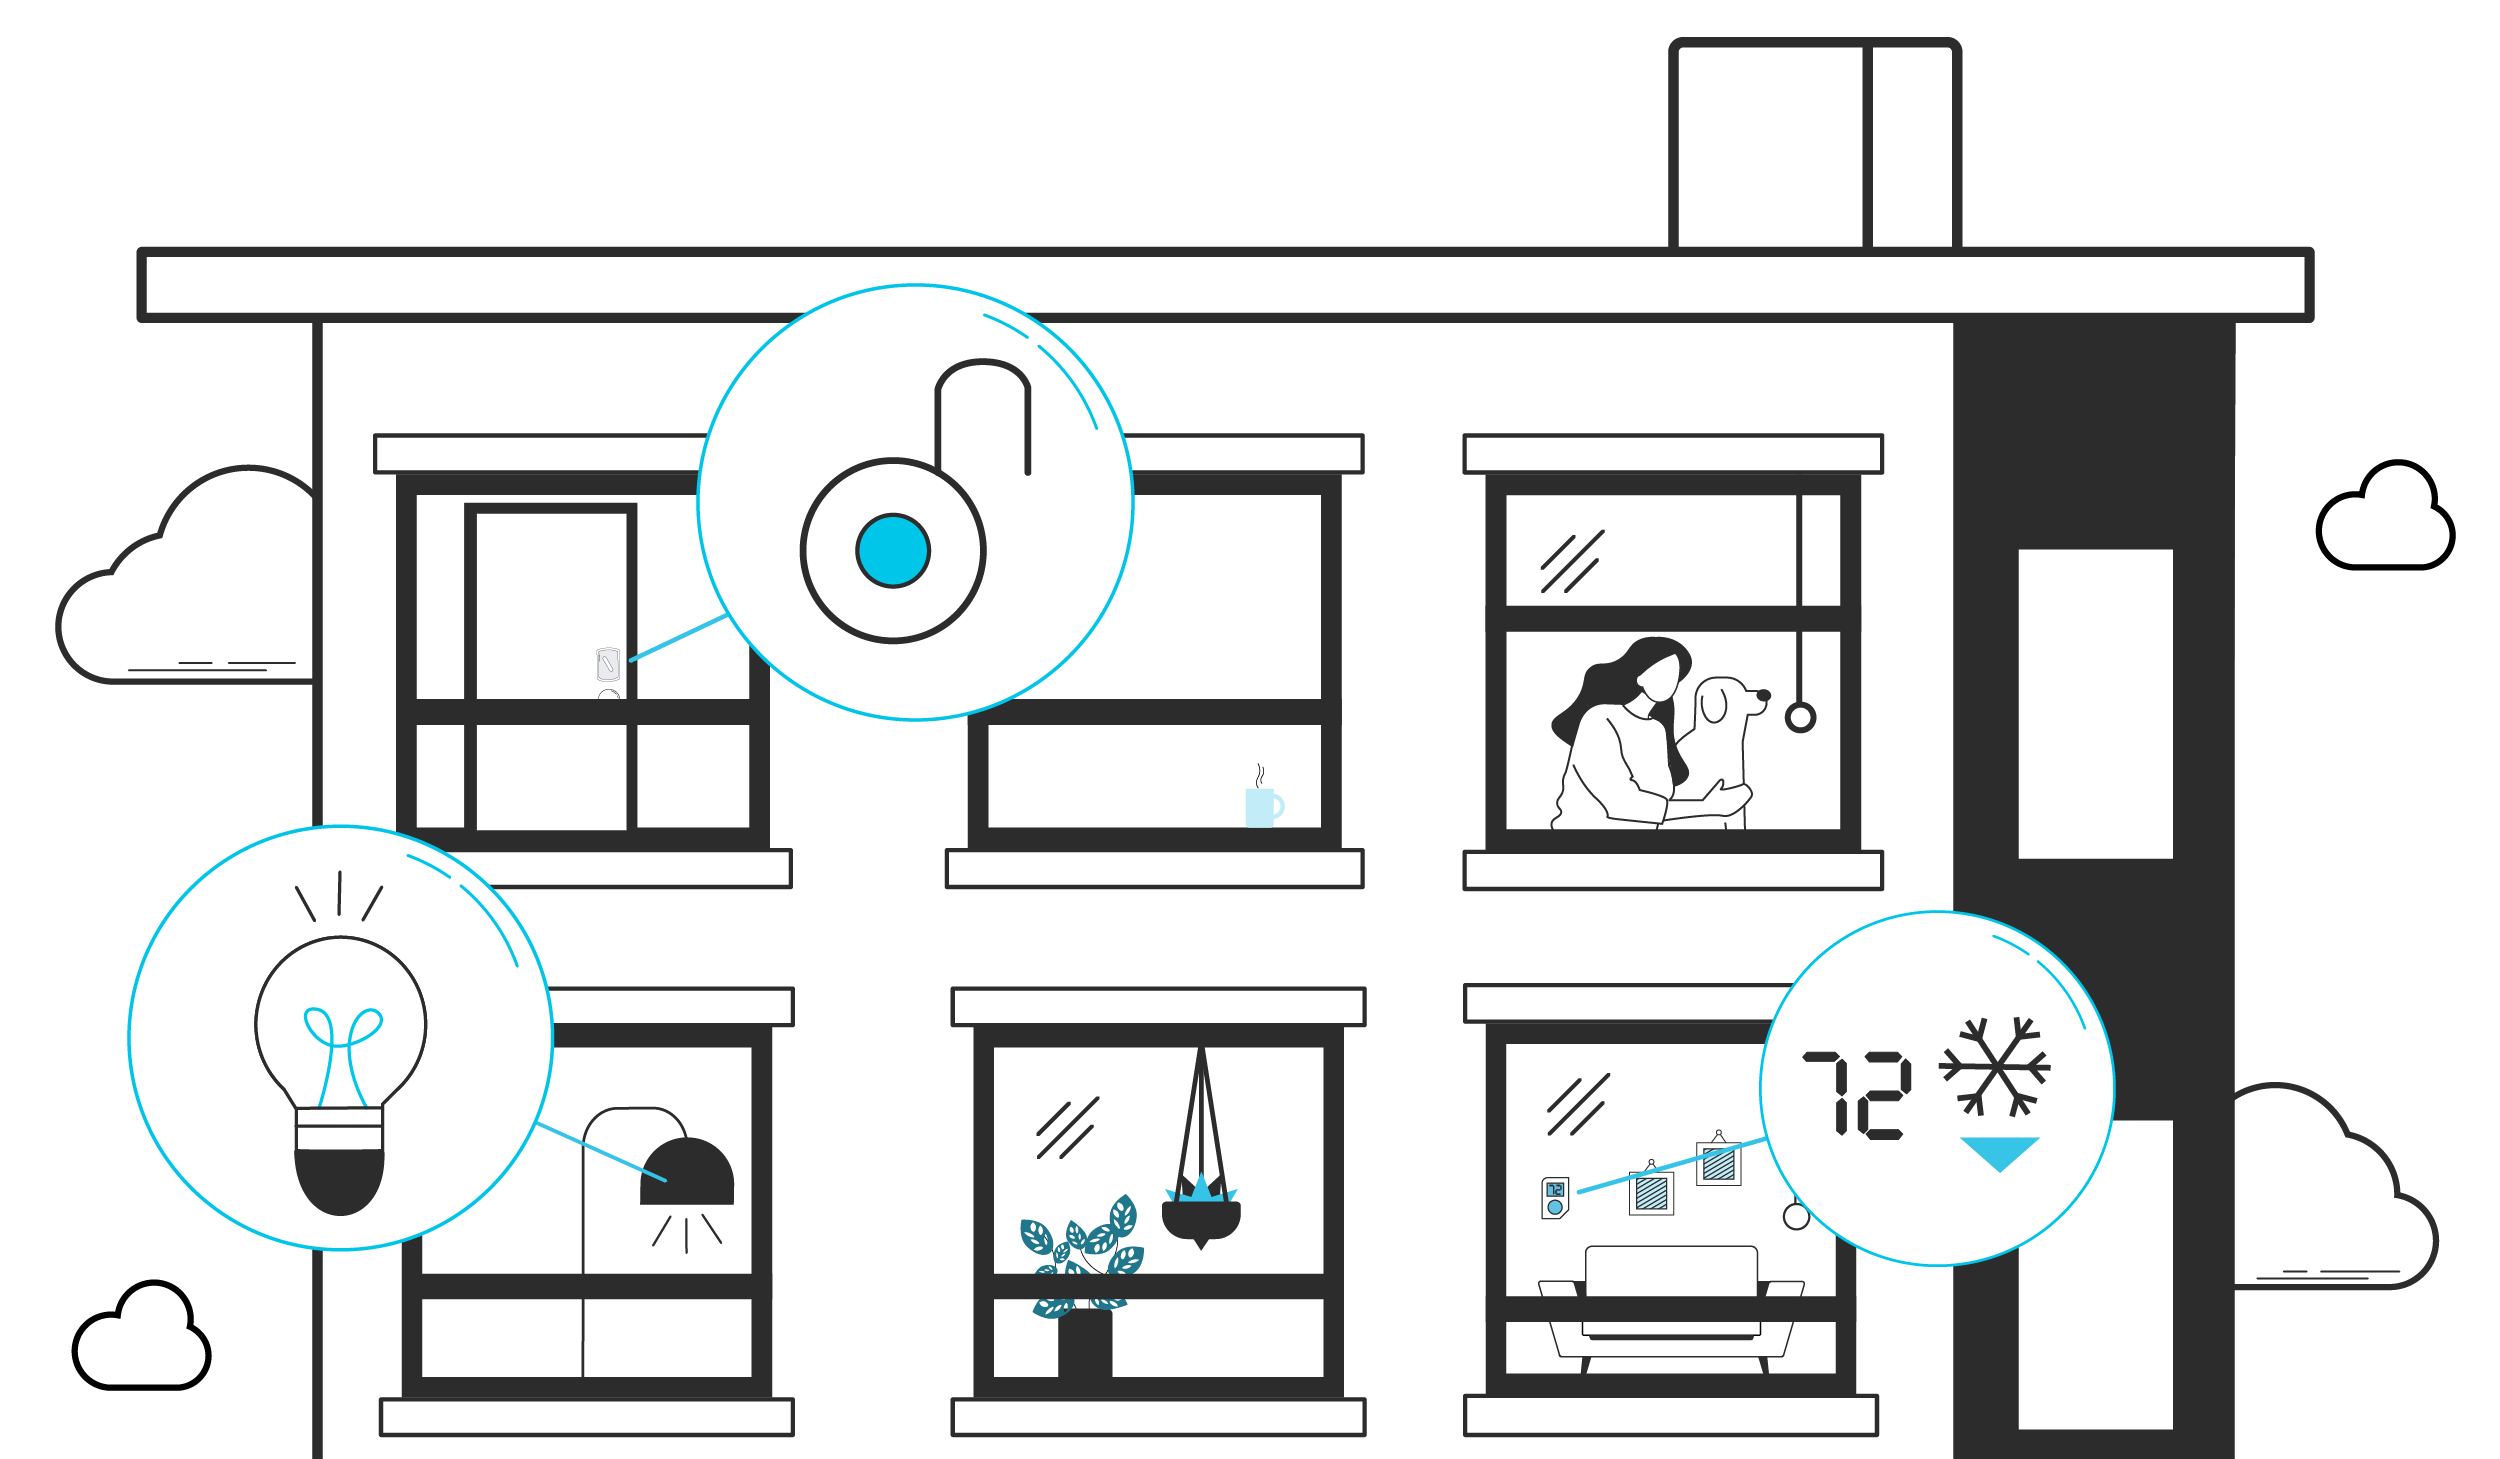 A resident in an apartment building equipped with an IoT system.